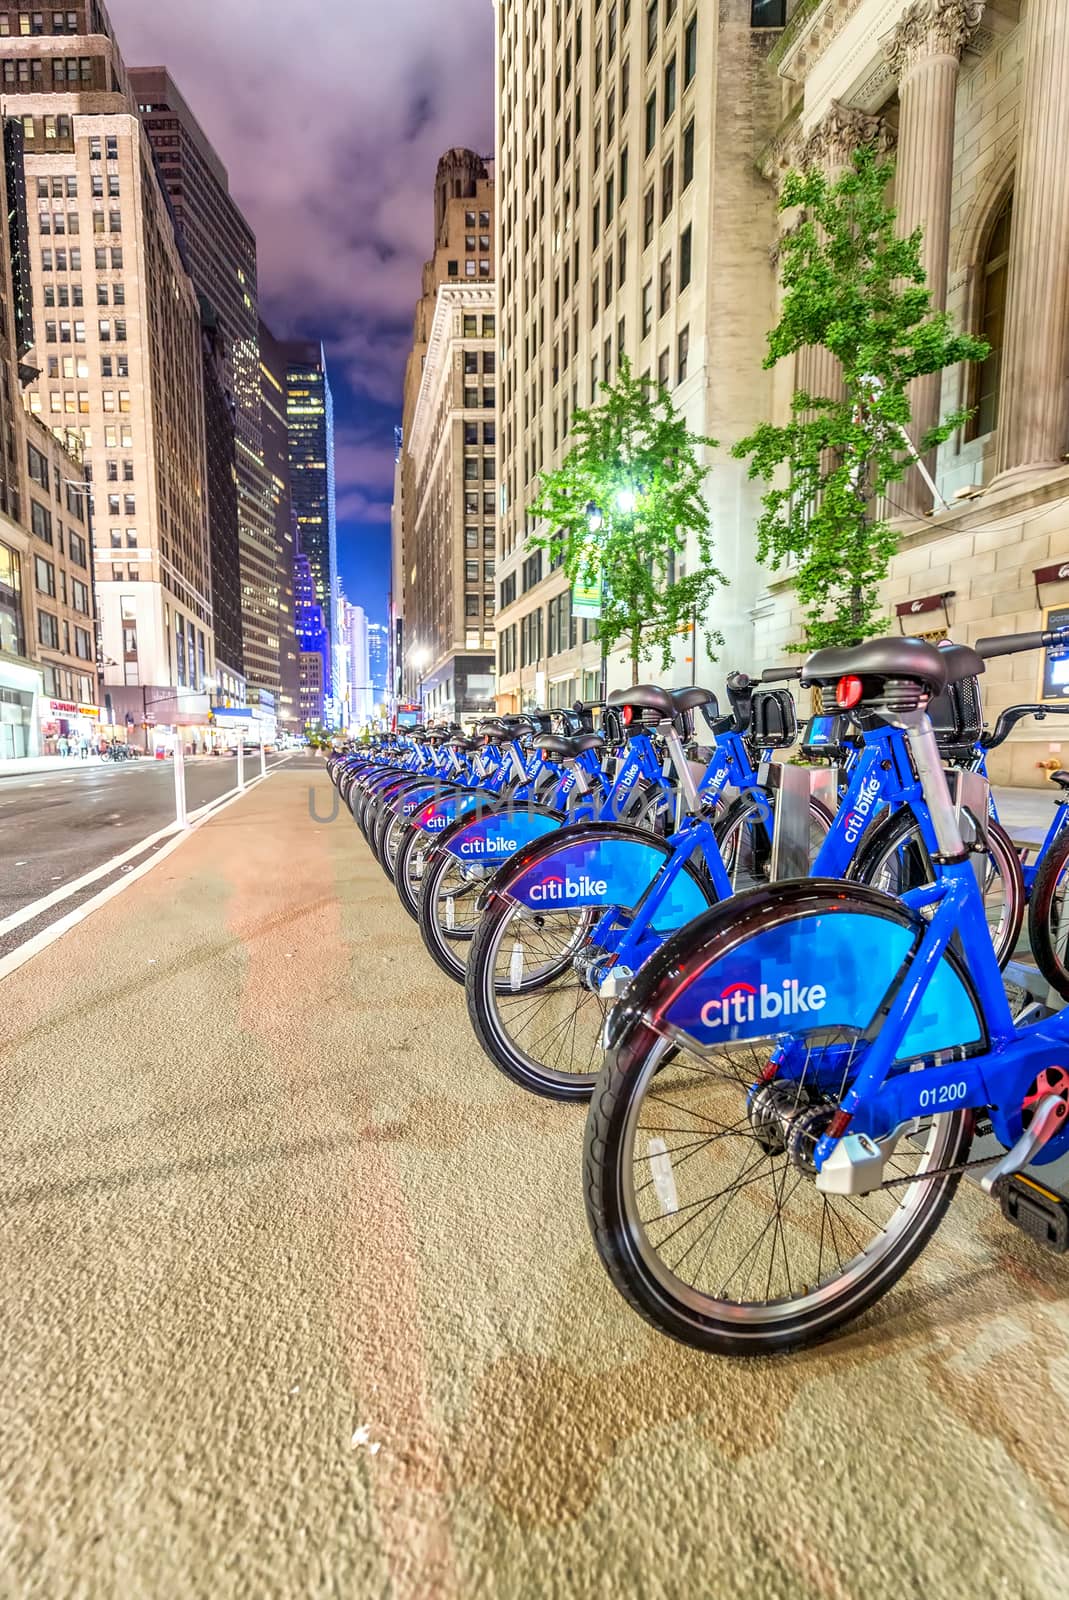 NEW YORK CITY - JUNE 8, 2013: New blue CitiBikes lined up in Man by jovannig